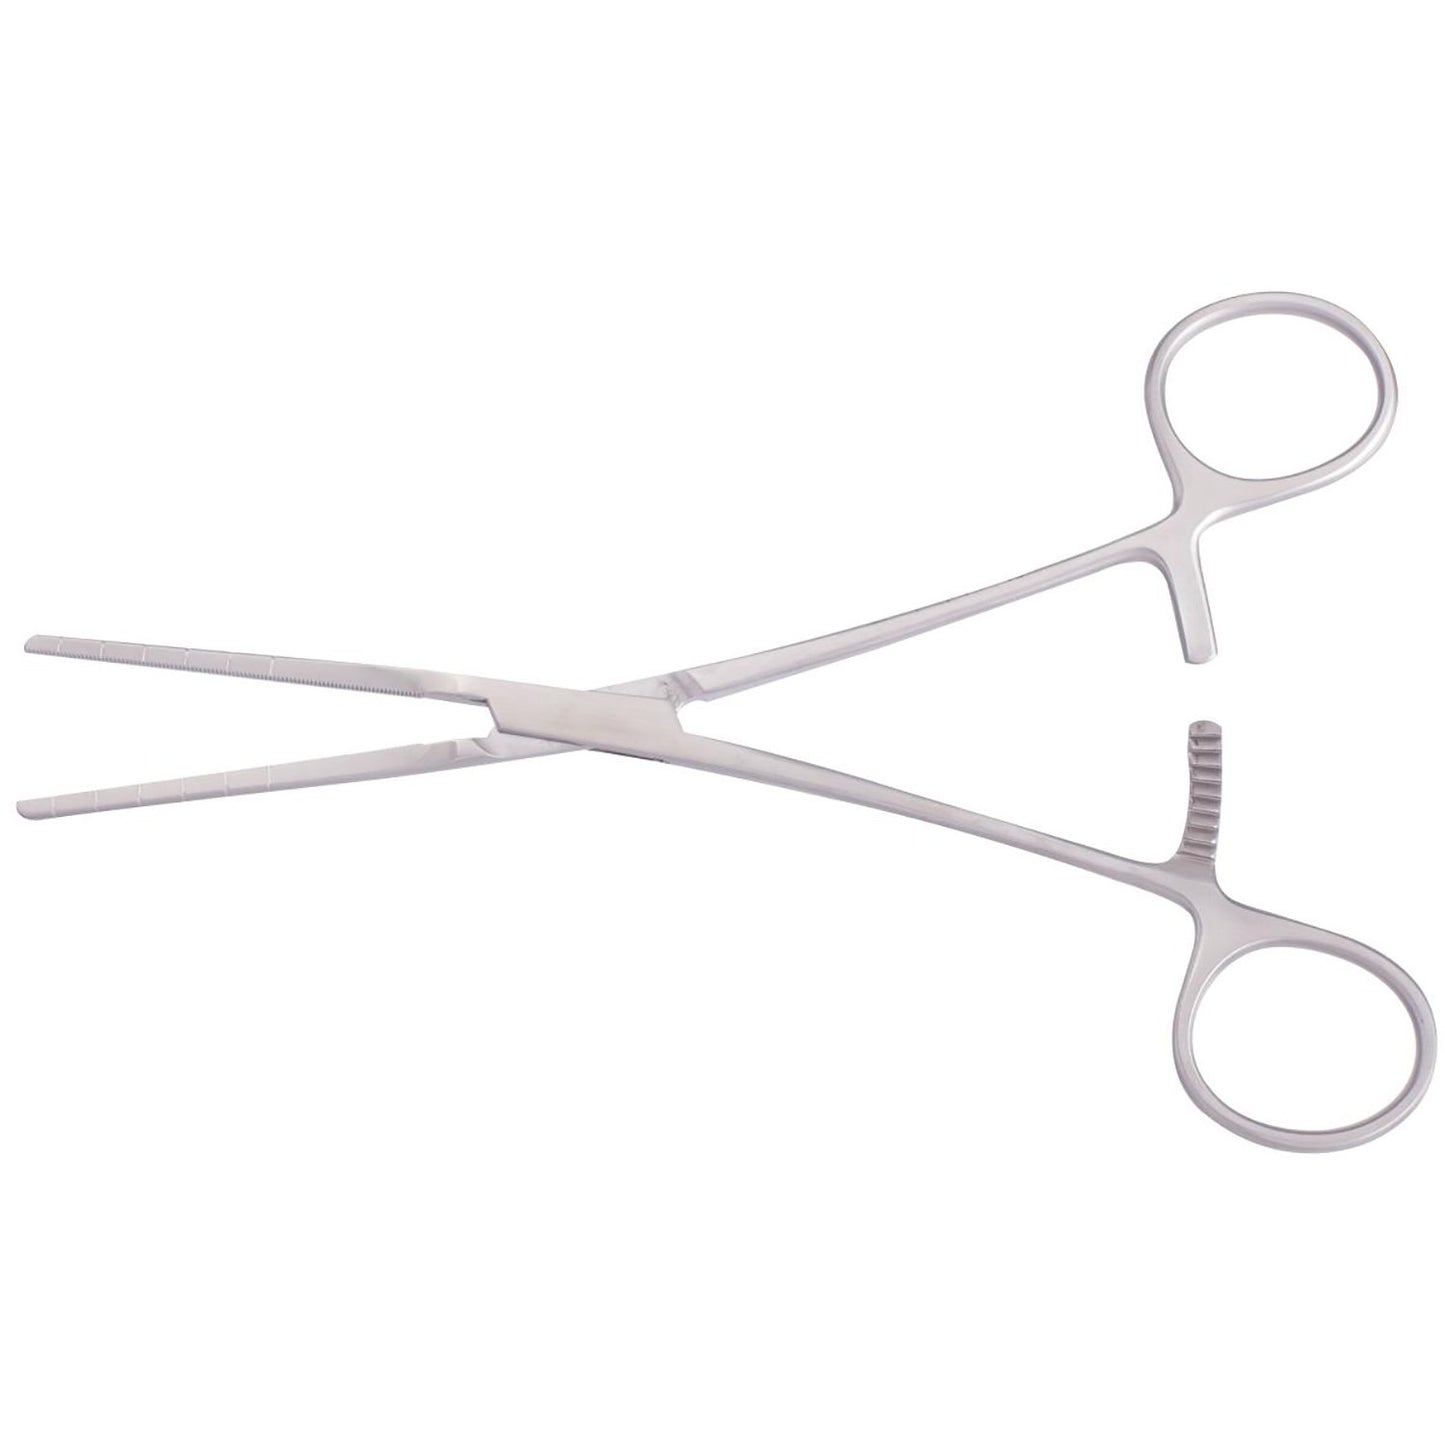 Cooley Peripheral Vascular Clamp